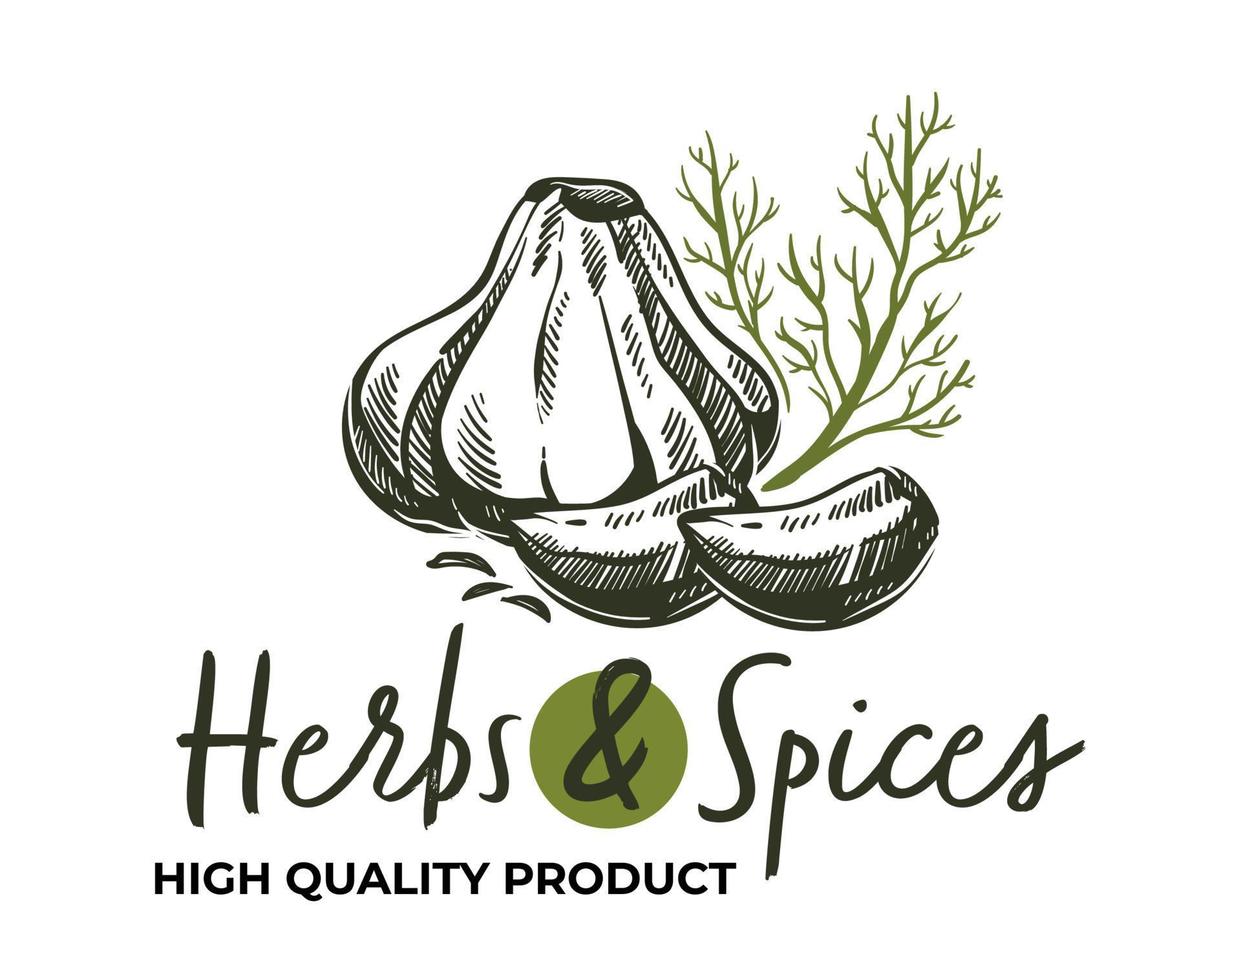 Herbs and spices high quality products shop logo vector